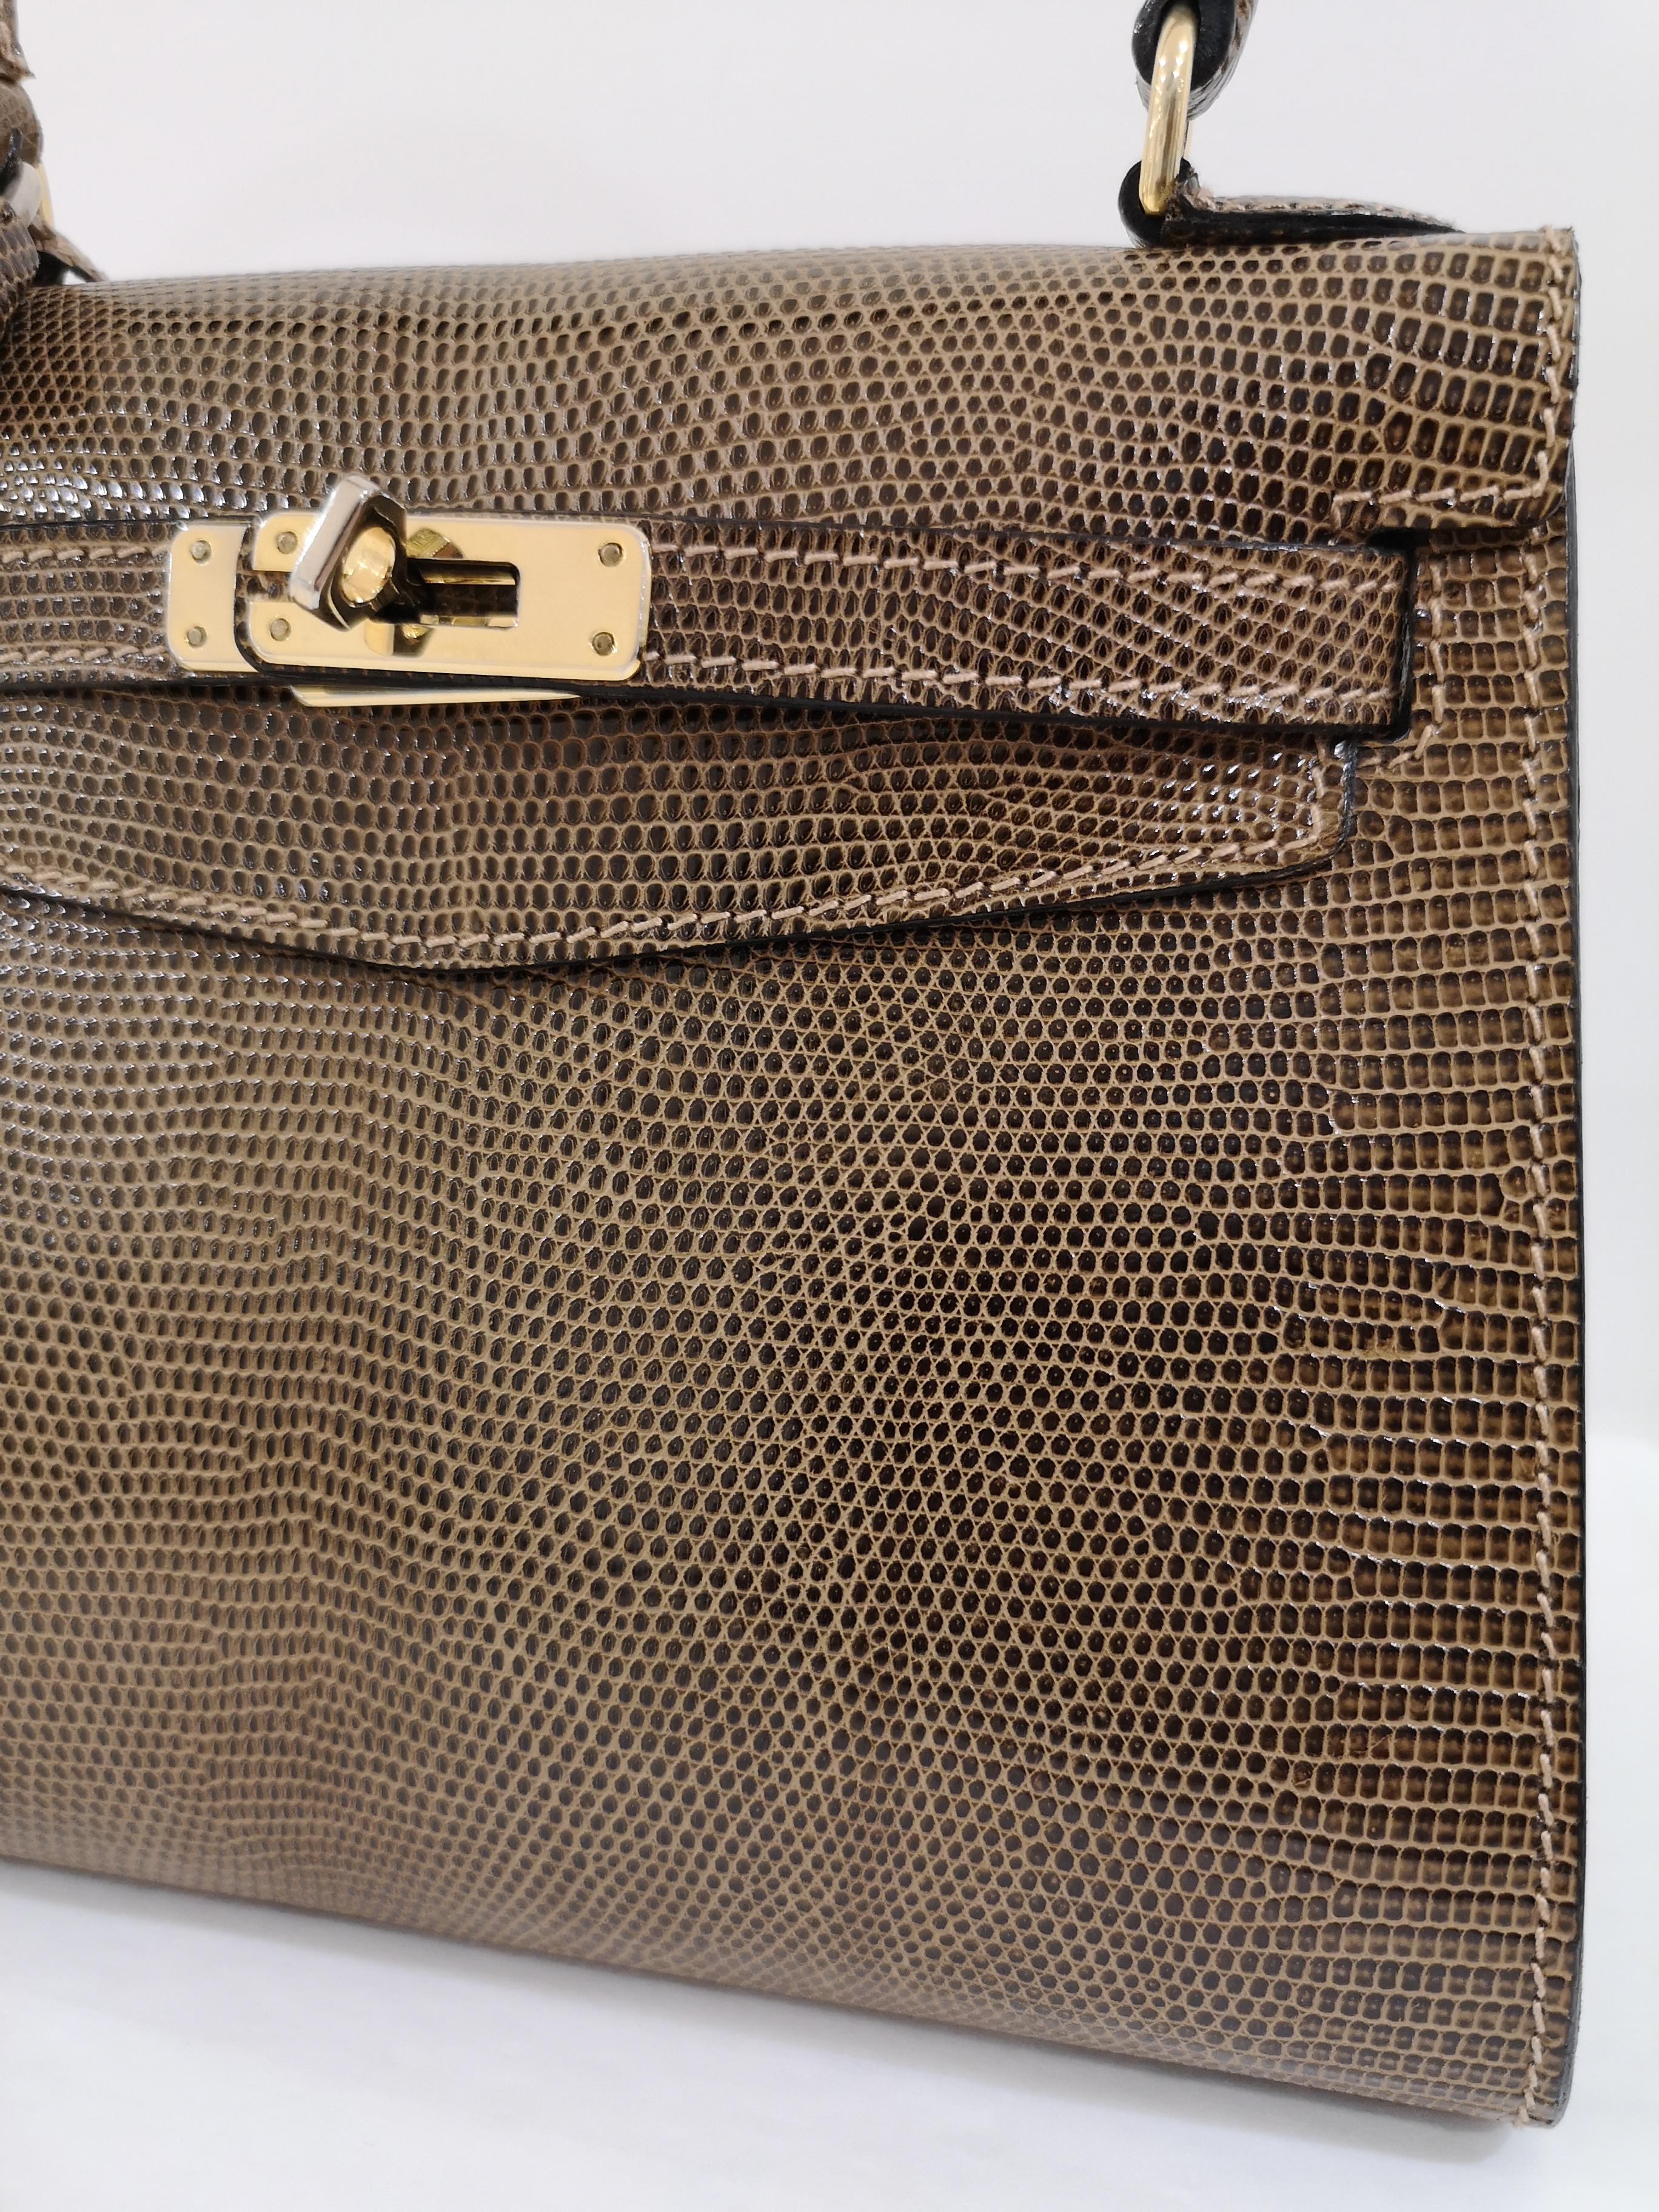 1970s Cellerini Firenze lizard mini kelly
totally made in italy
comes with shoulder strap
measurements: 19 * 15 cm * 10 cm depth